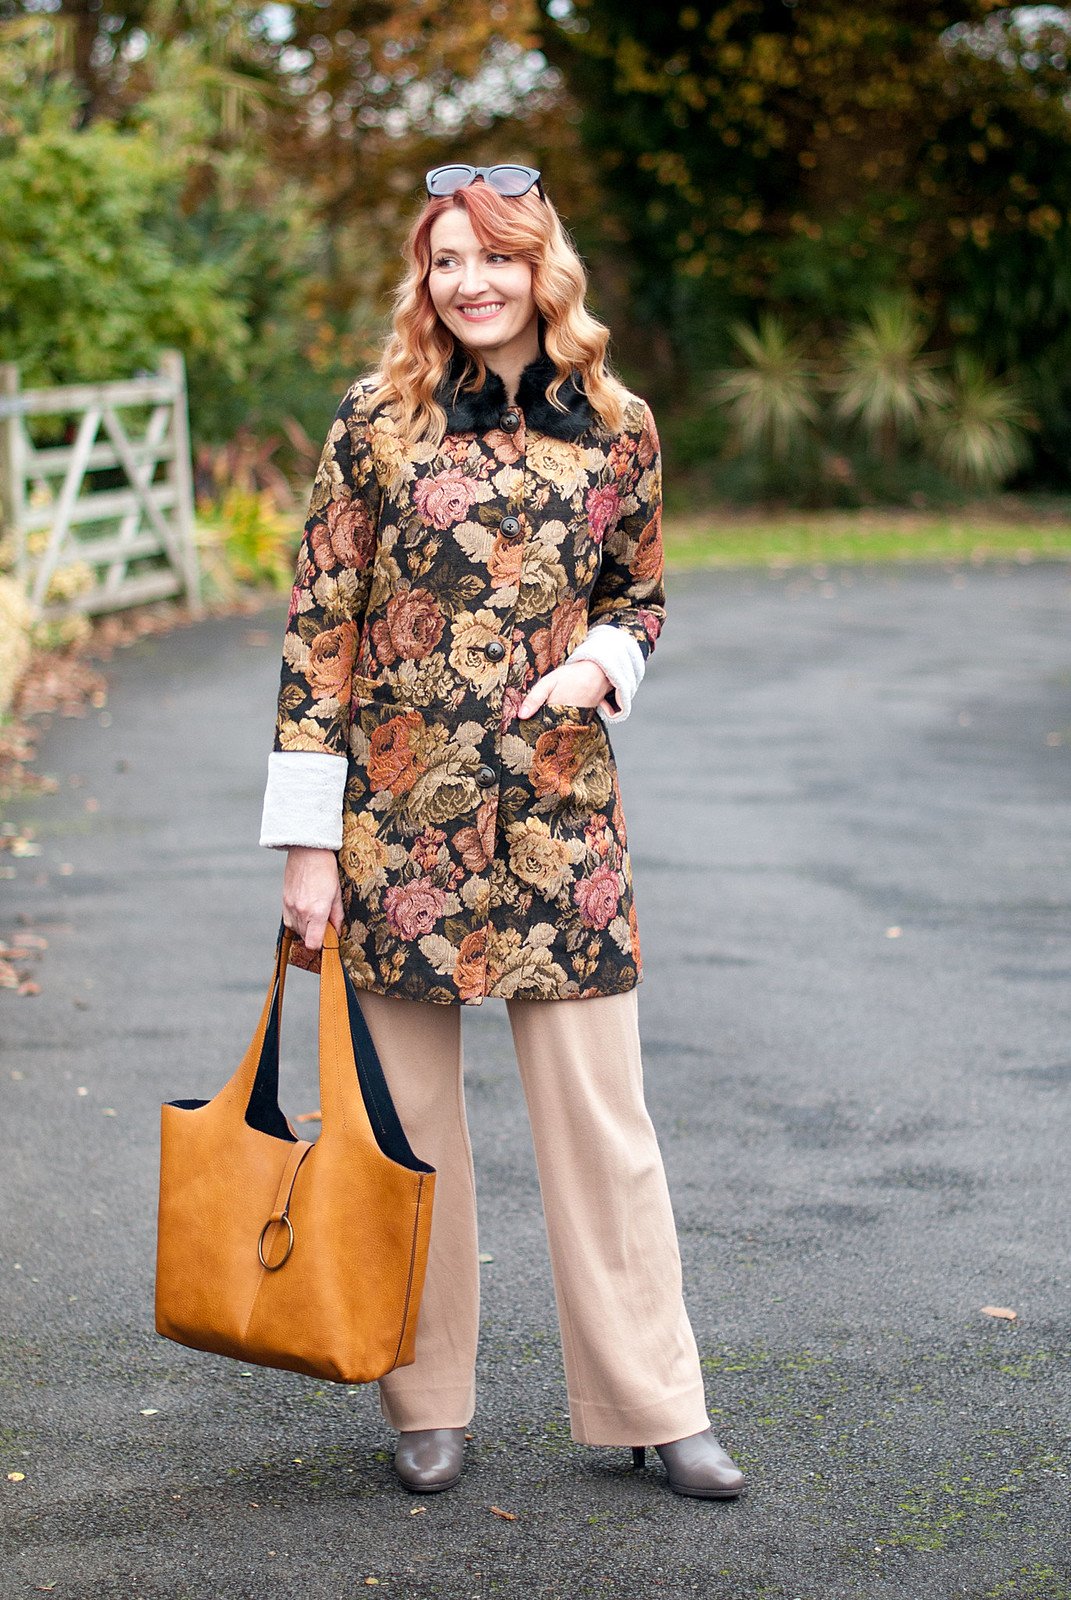 Autumn dressing, fall outfits, winter florals: Floral tapestry coat with fur collar, wide leg camel trousers, grey ankle boots | Not Dressed As Lamb, over 40 fashion